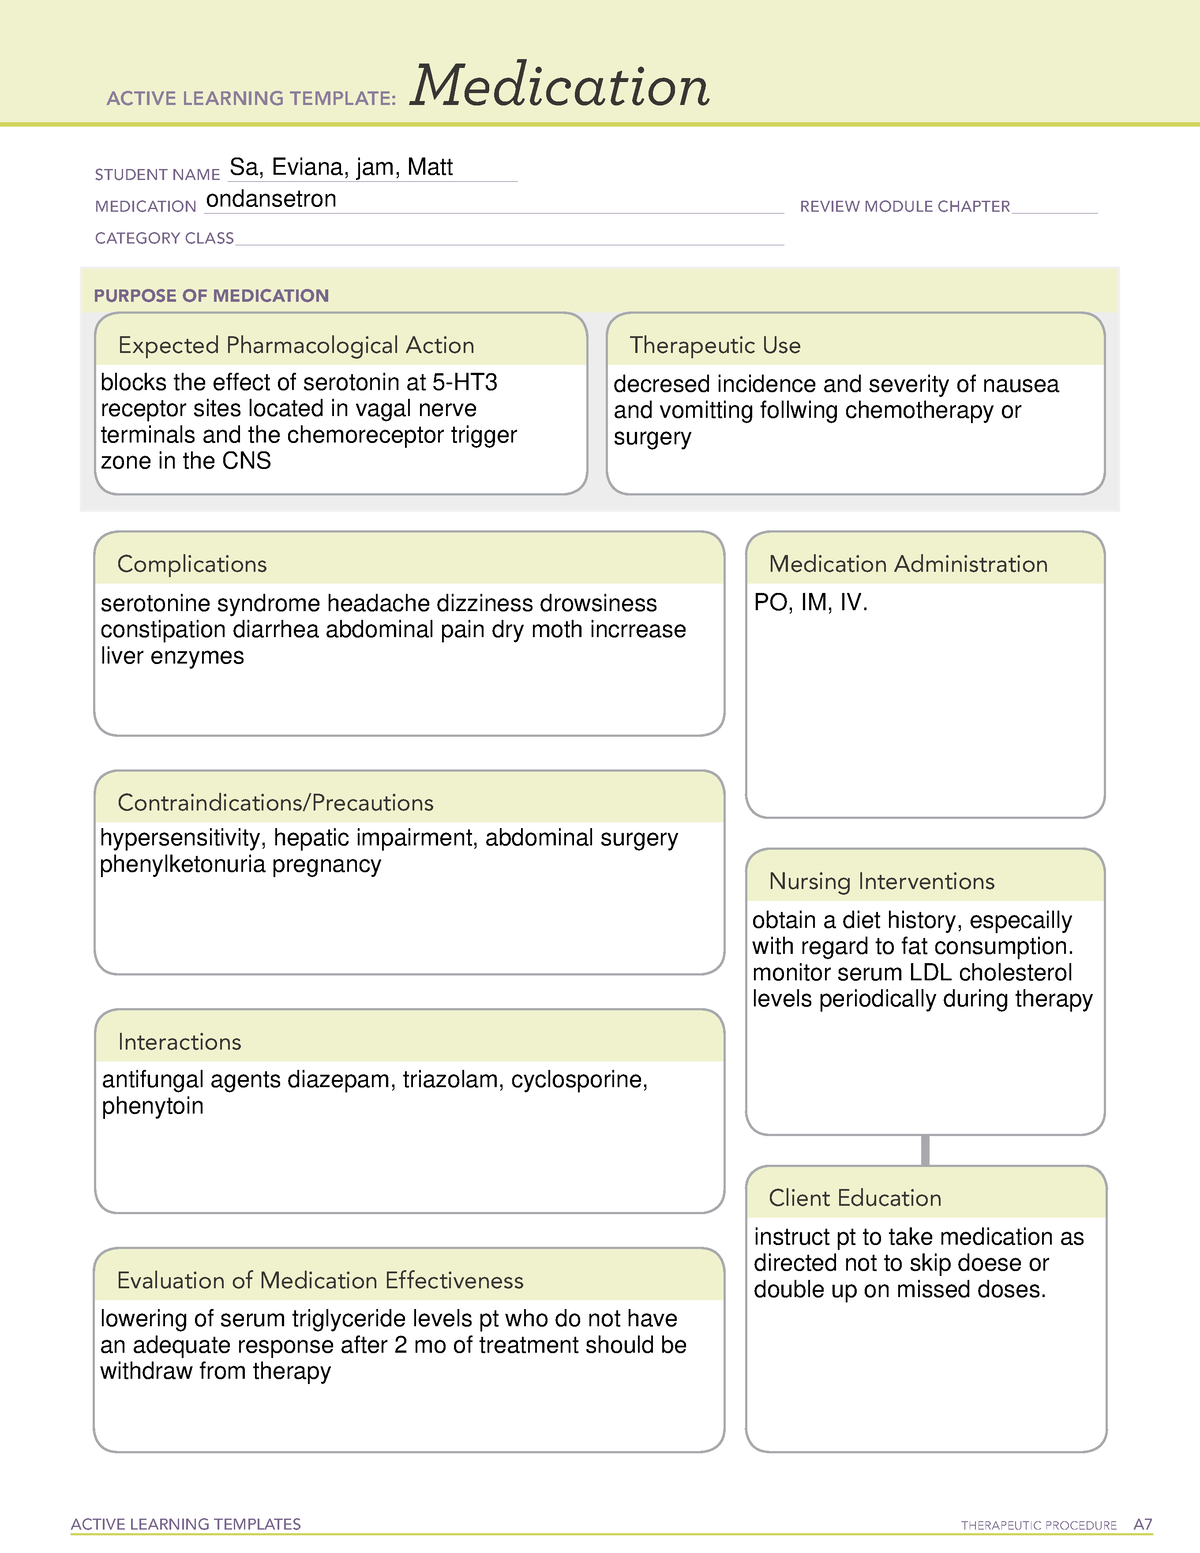 Ondansetron ACTIVE LEARNING TEMPLATES THERAPEUTIC PROCEDURE A